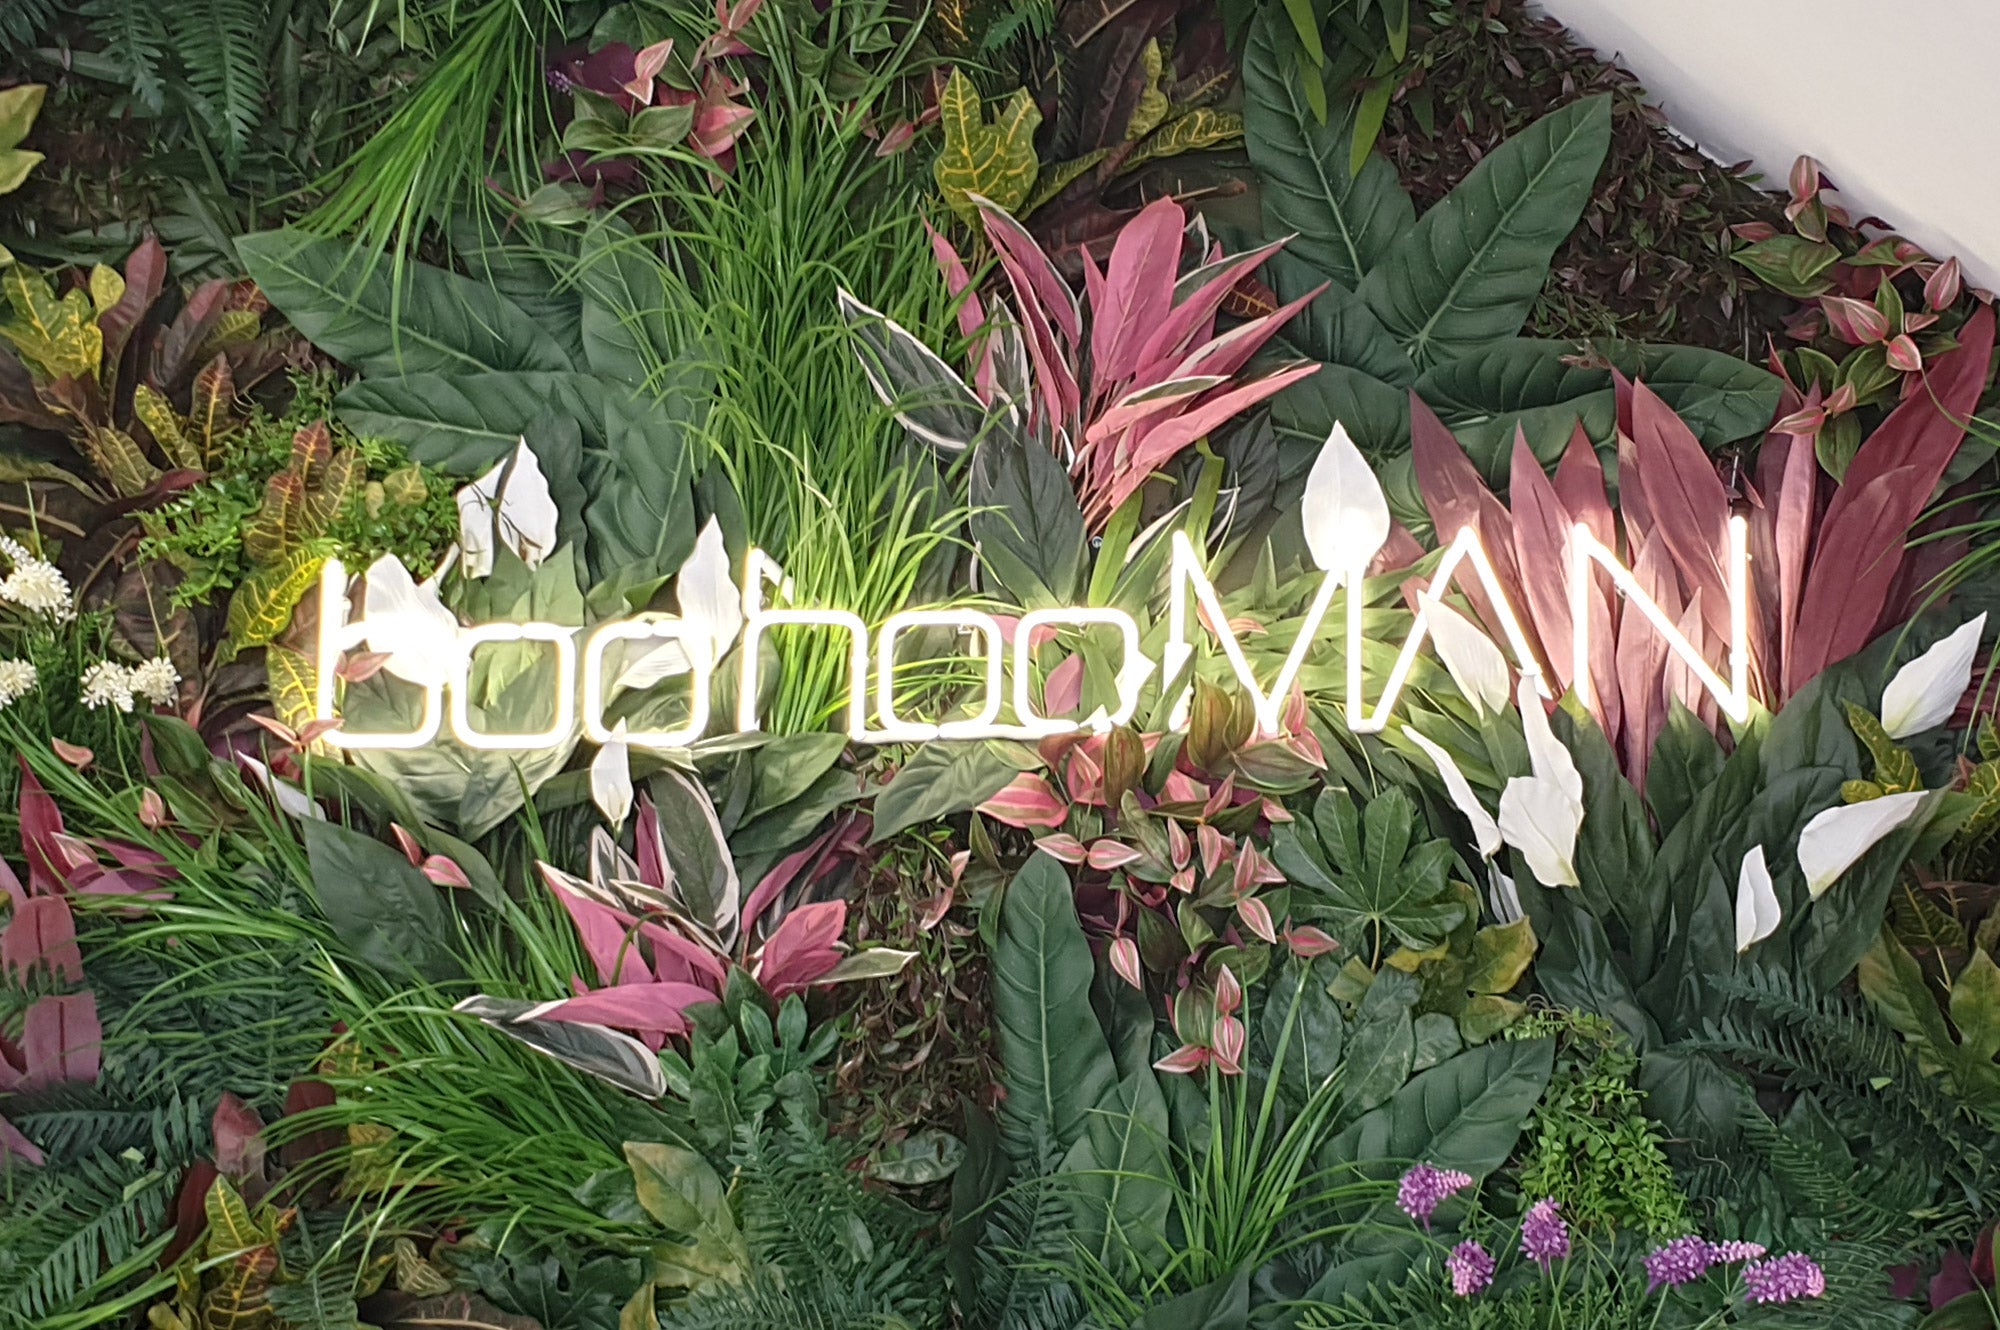 boohooMAN' white neon sign. Real glass neon fitted onto artificial foliage.